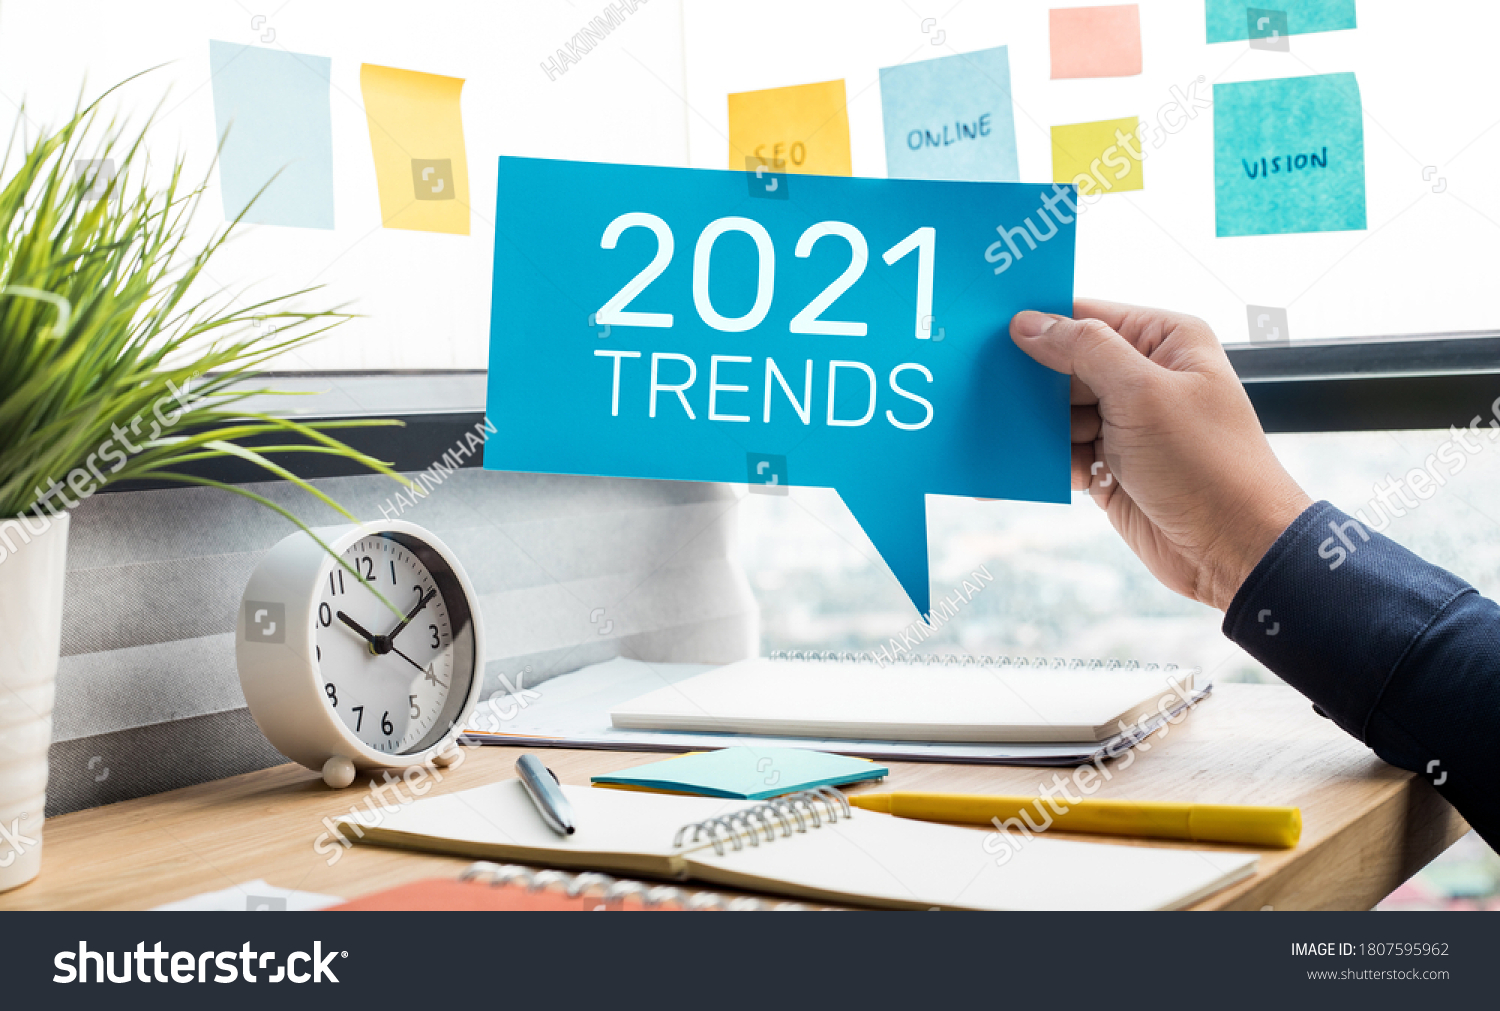 Trends of 2021 concepts with text and business person.creativity to success #1807595962